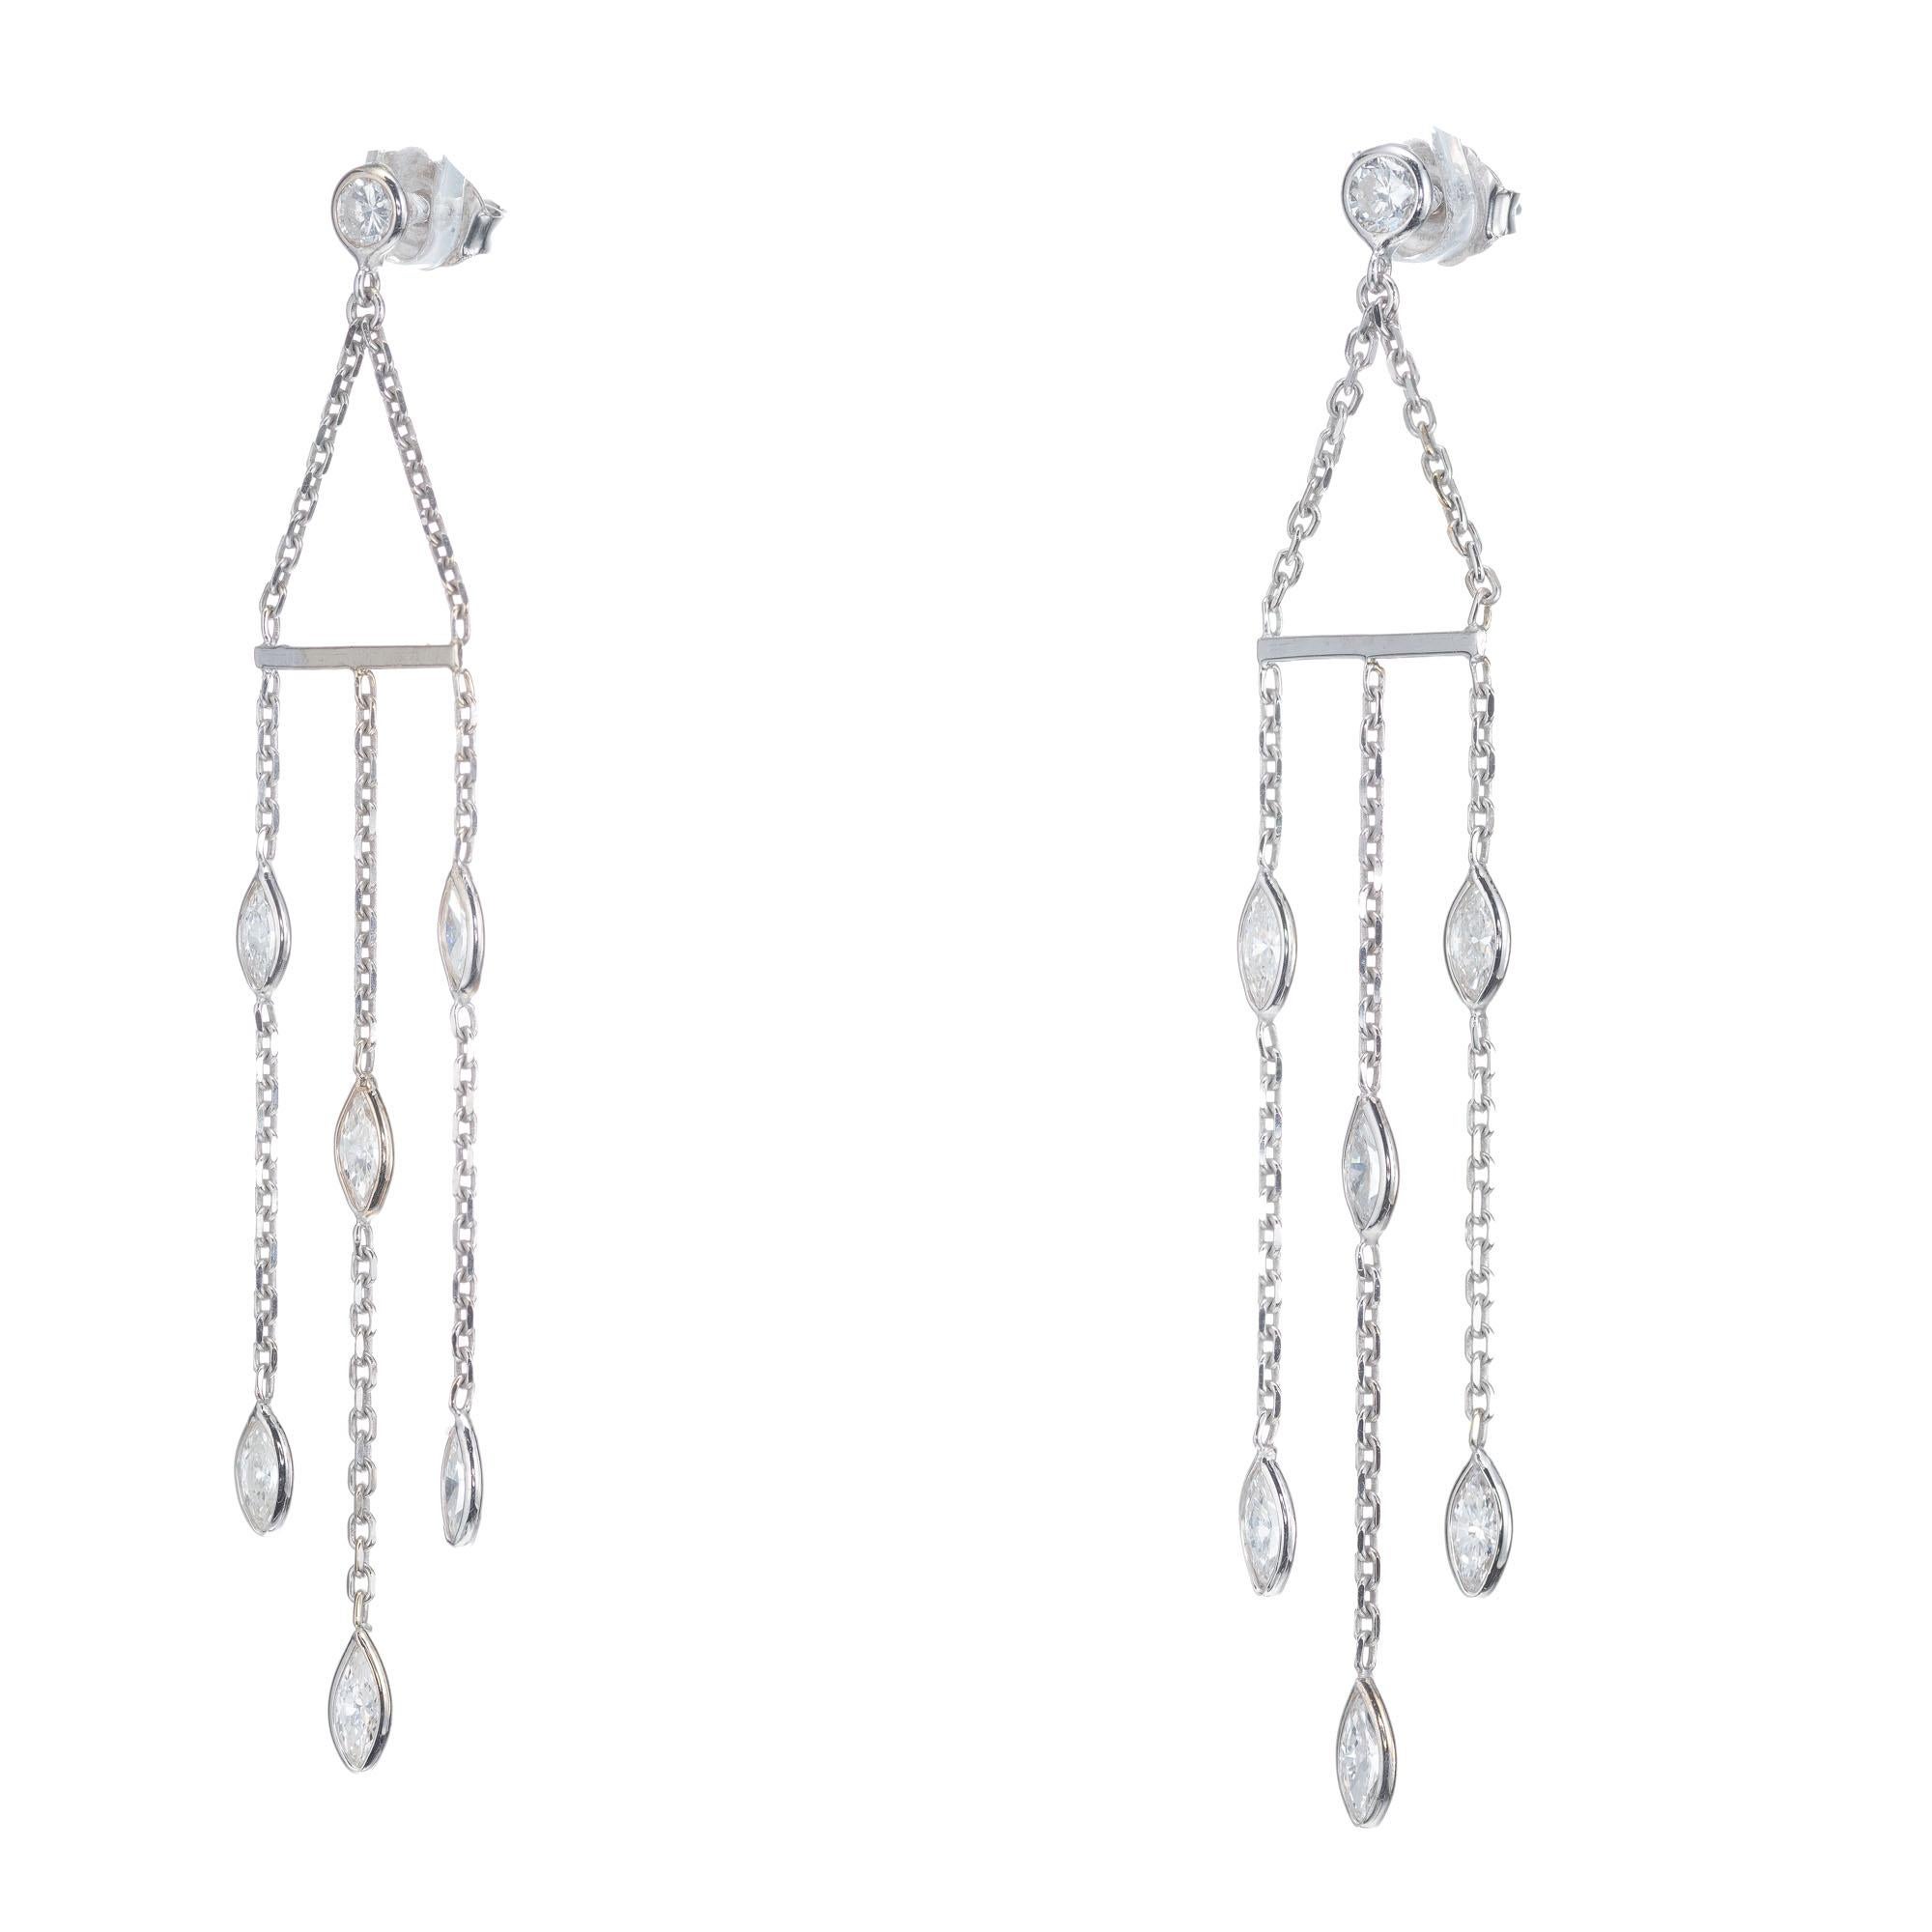 Art Deco styled Diamond By The Yard dangle earrings with round and marquise diamonds. Set in 14k white gold. Created in the Peter Suchy Workshop. 

2 round brilliant cut diamonds, approx. total weight .30cts, G-H, VS to SI, excellent brilliance
12